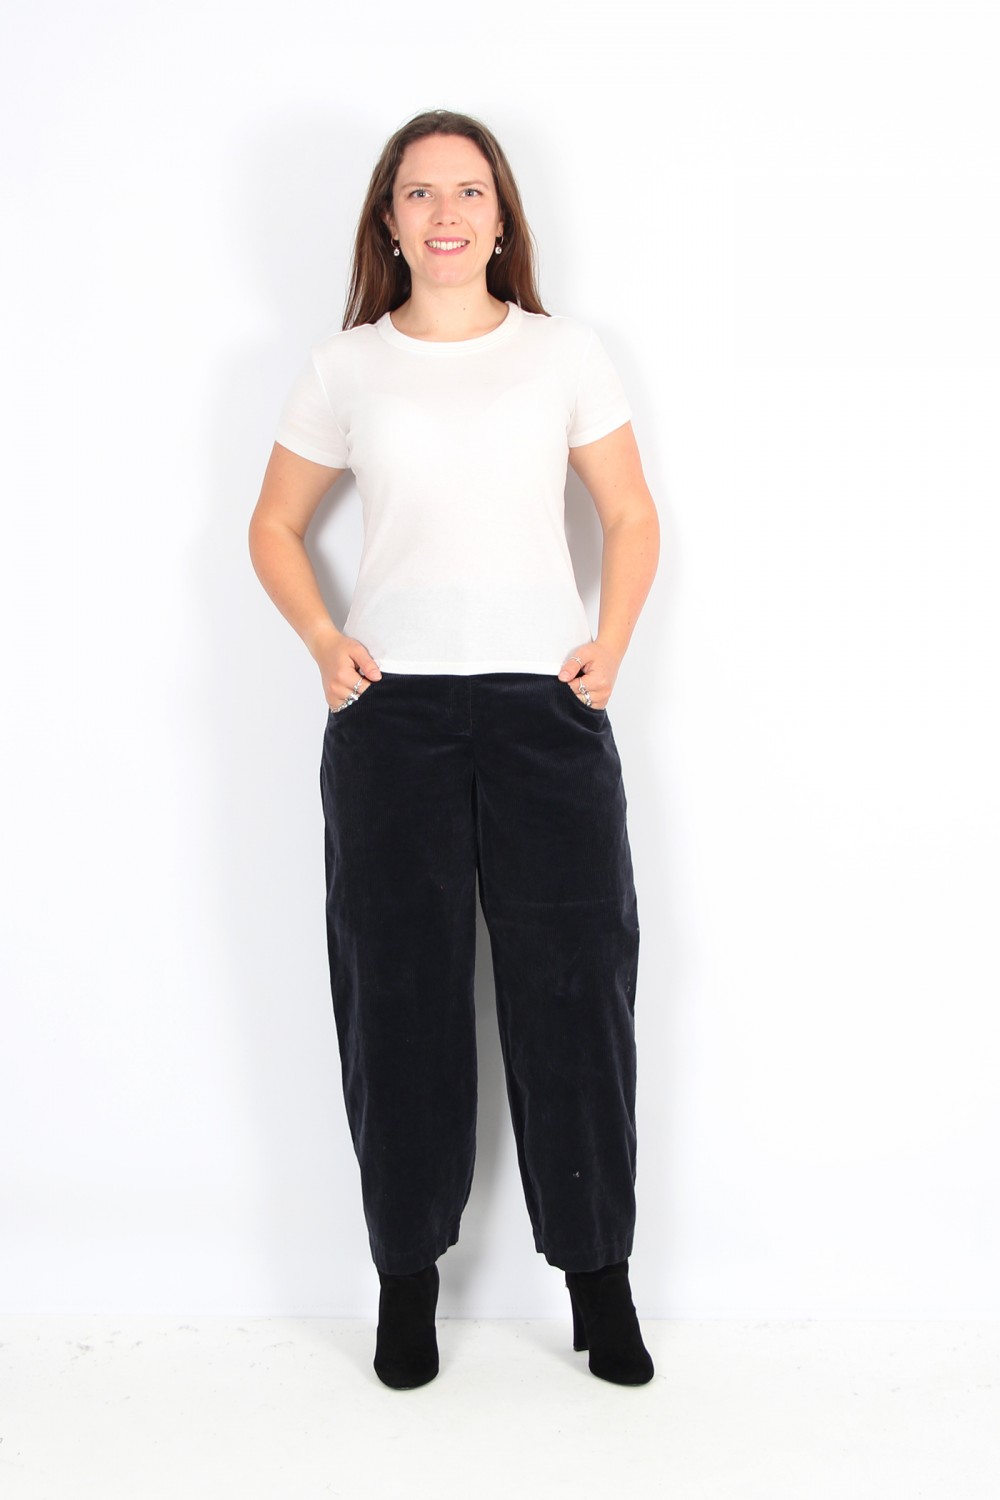 OSKA Trousers Kahren 314 Navy / Cotton Cord With Stretch Content